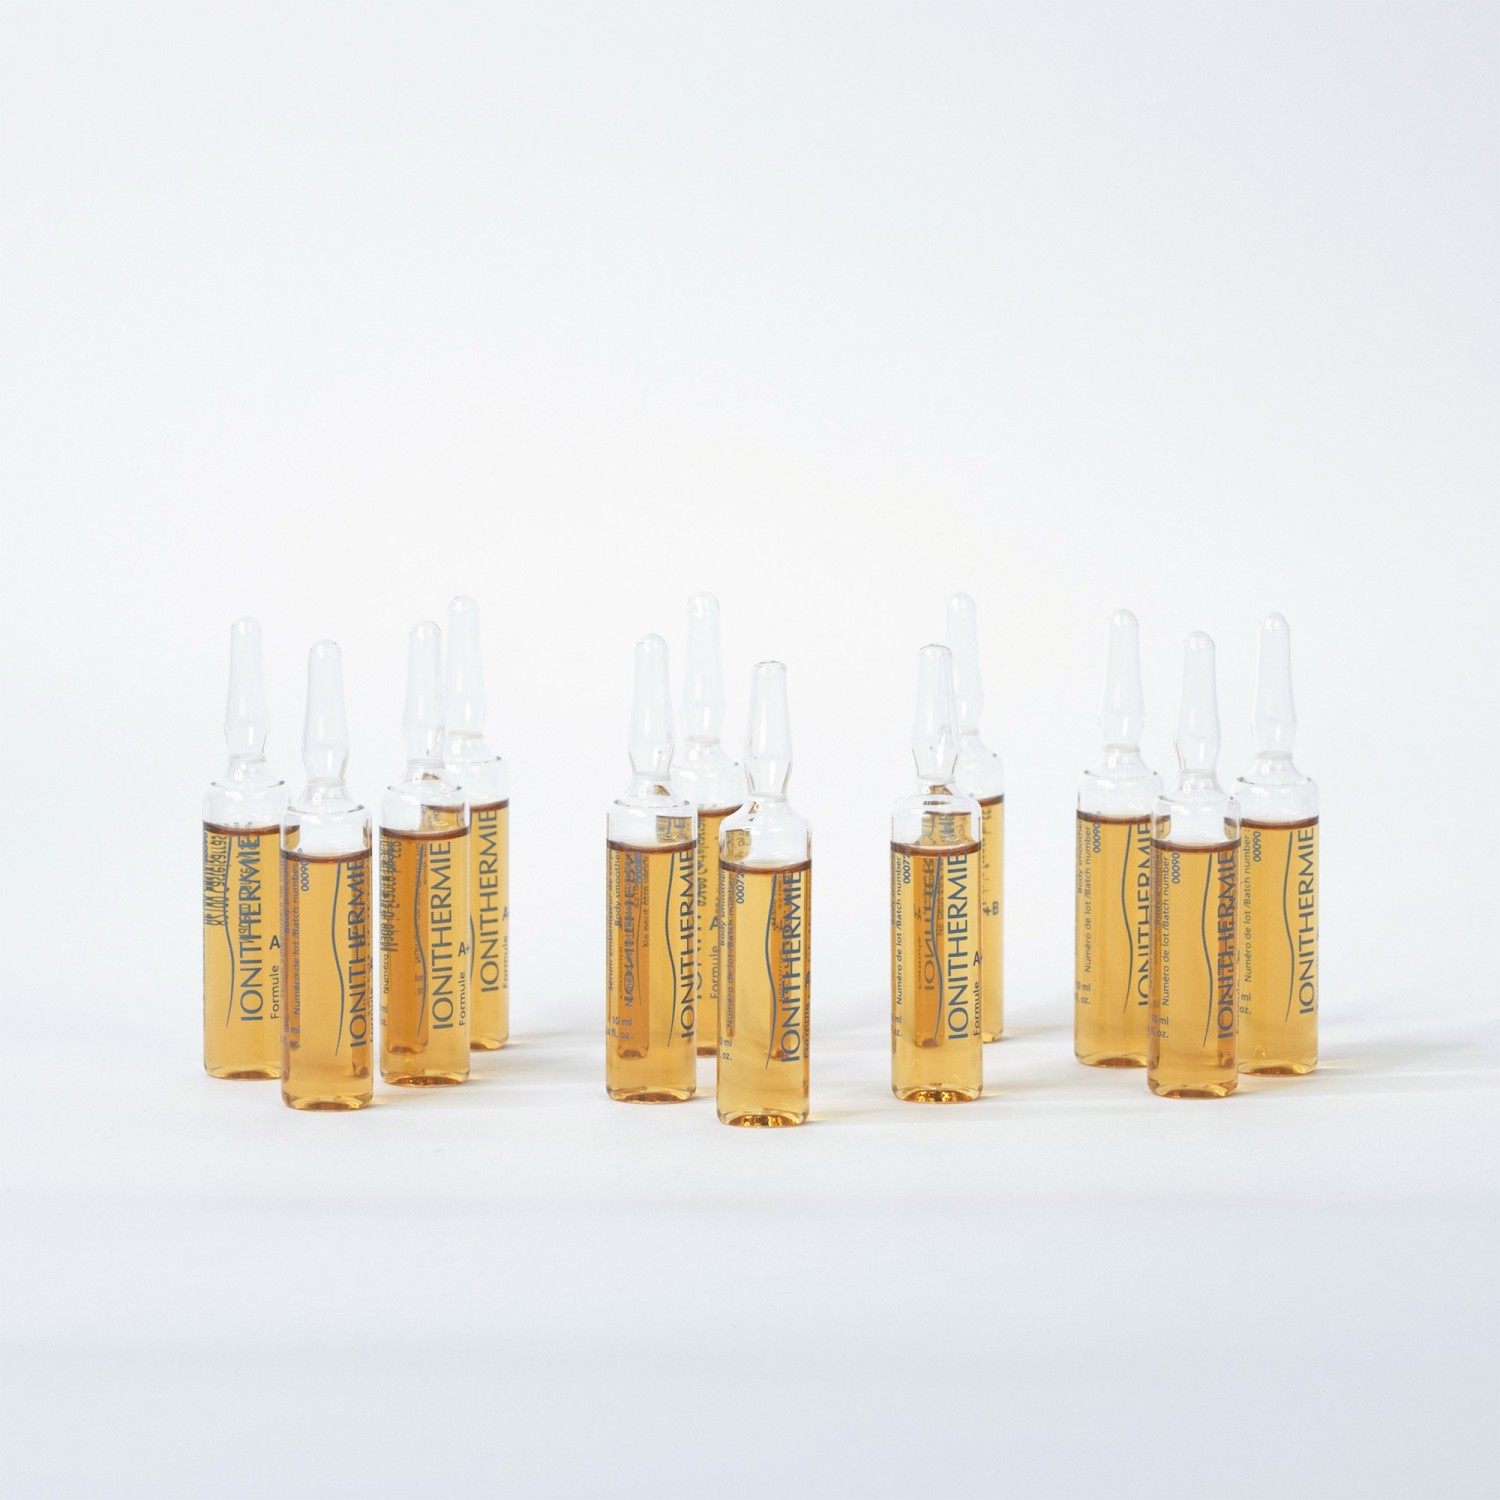 Formule A+B - 12 ampoules de 10ml - CORPS -  IONITHERMIE - MADE IN FRANCE